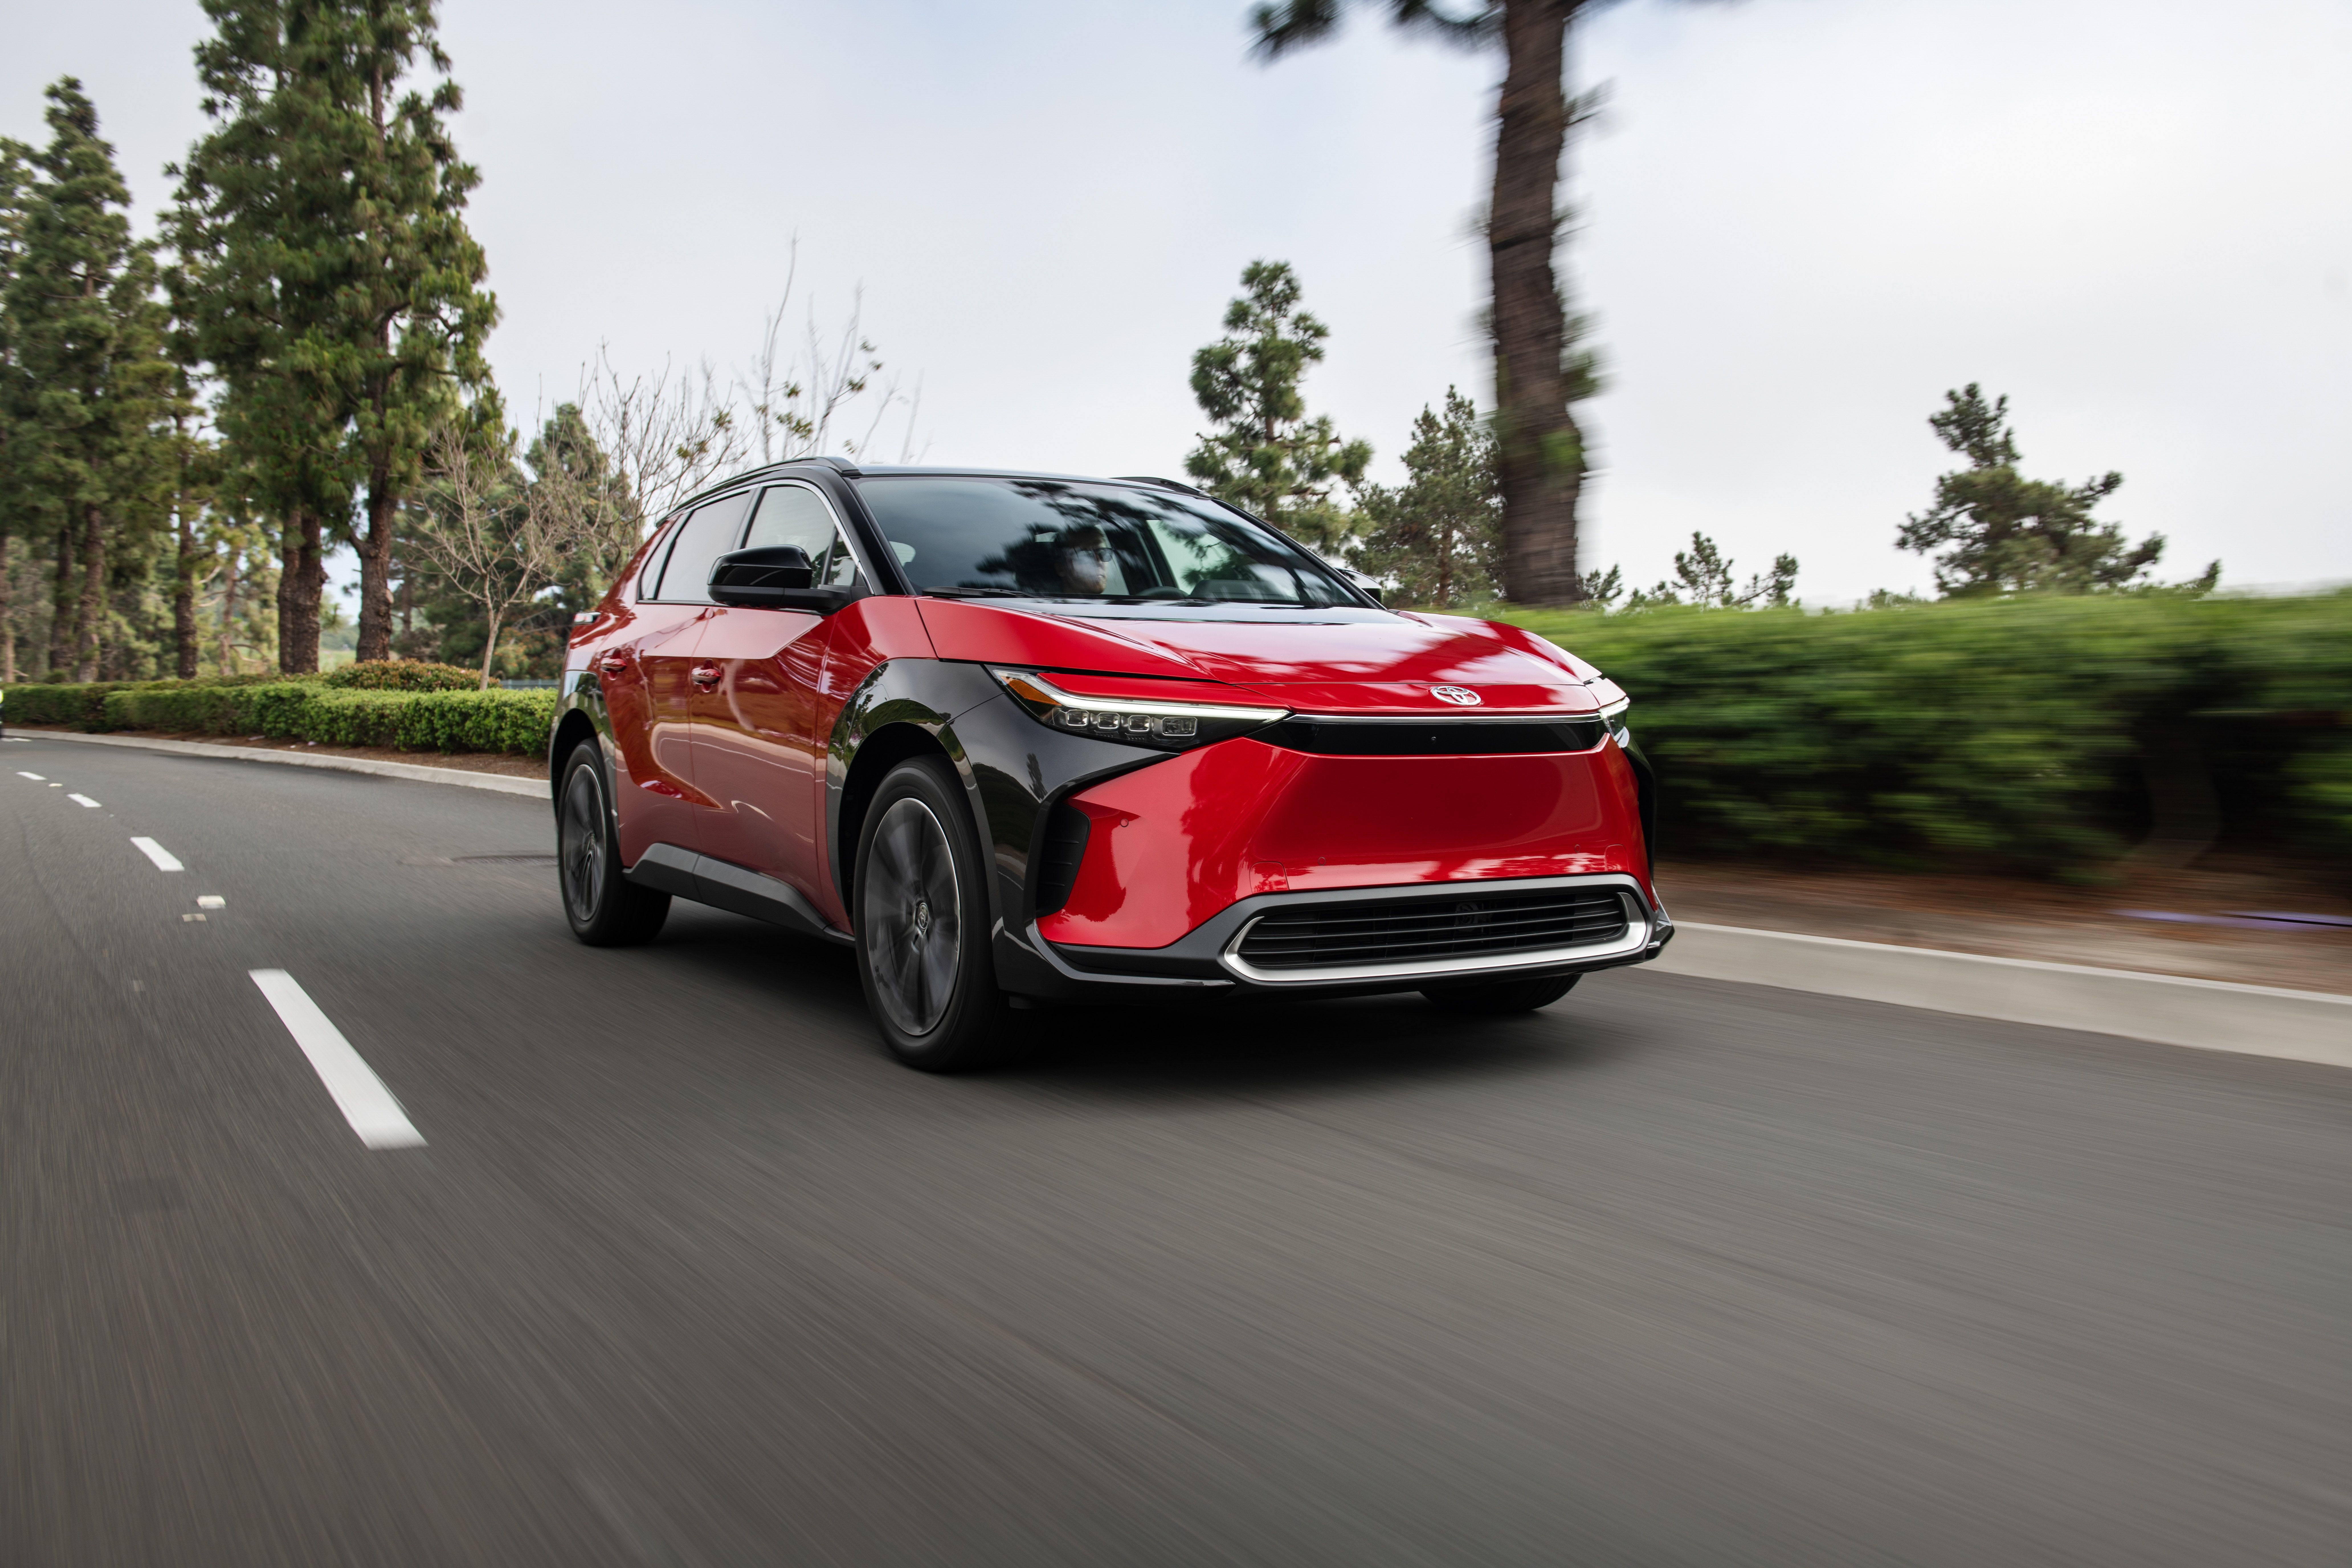 2023 Toyota bZ4X: The Small Electric SUV That Does It All – Longo Toyota  Blog